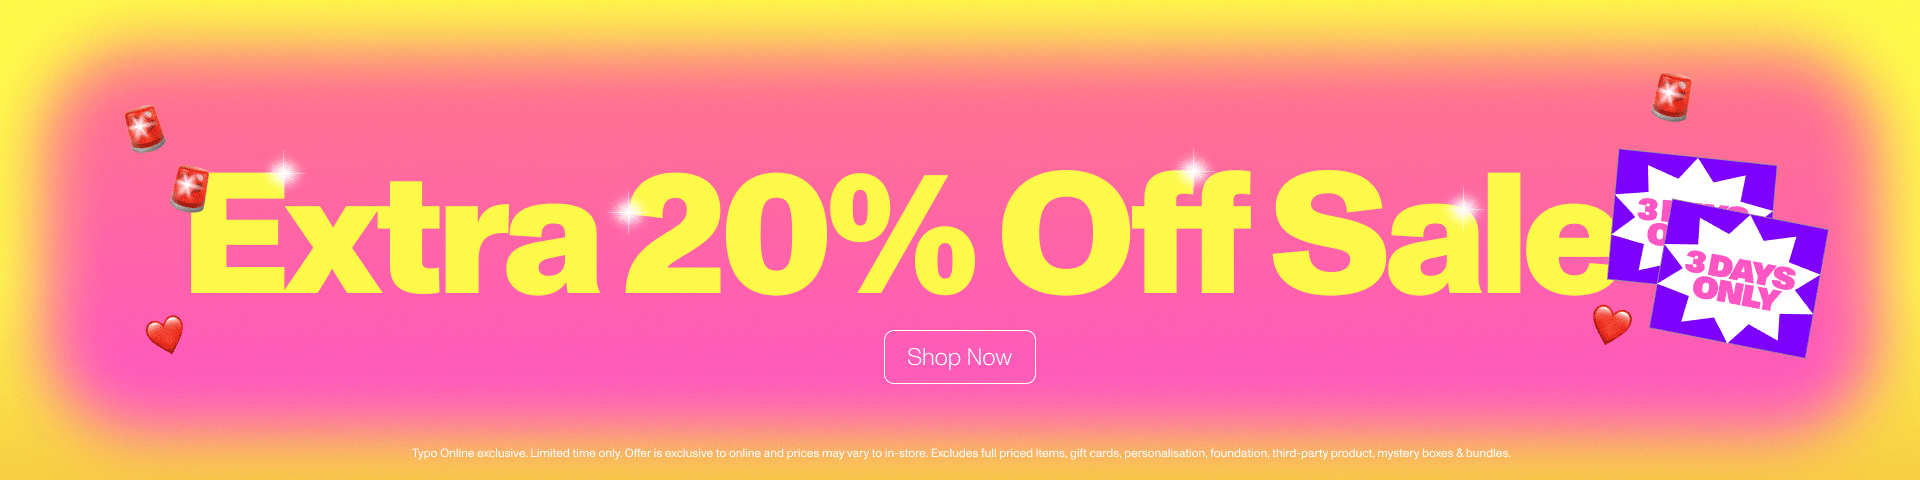 Extra 20% off sale. 3 days only. Shop now.